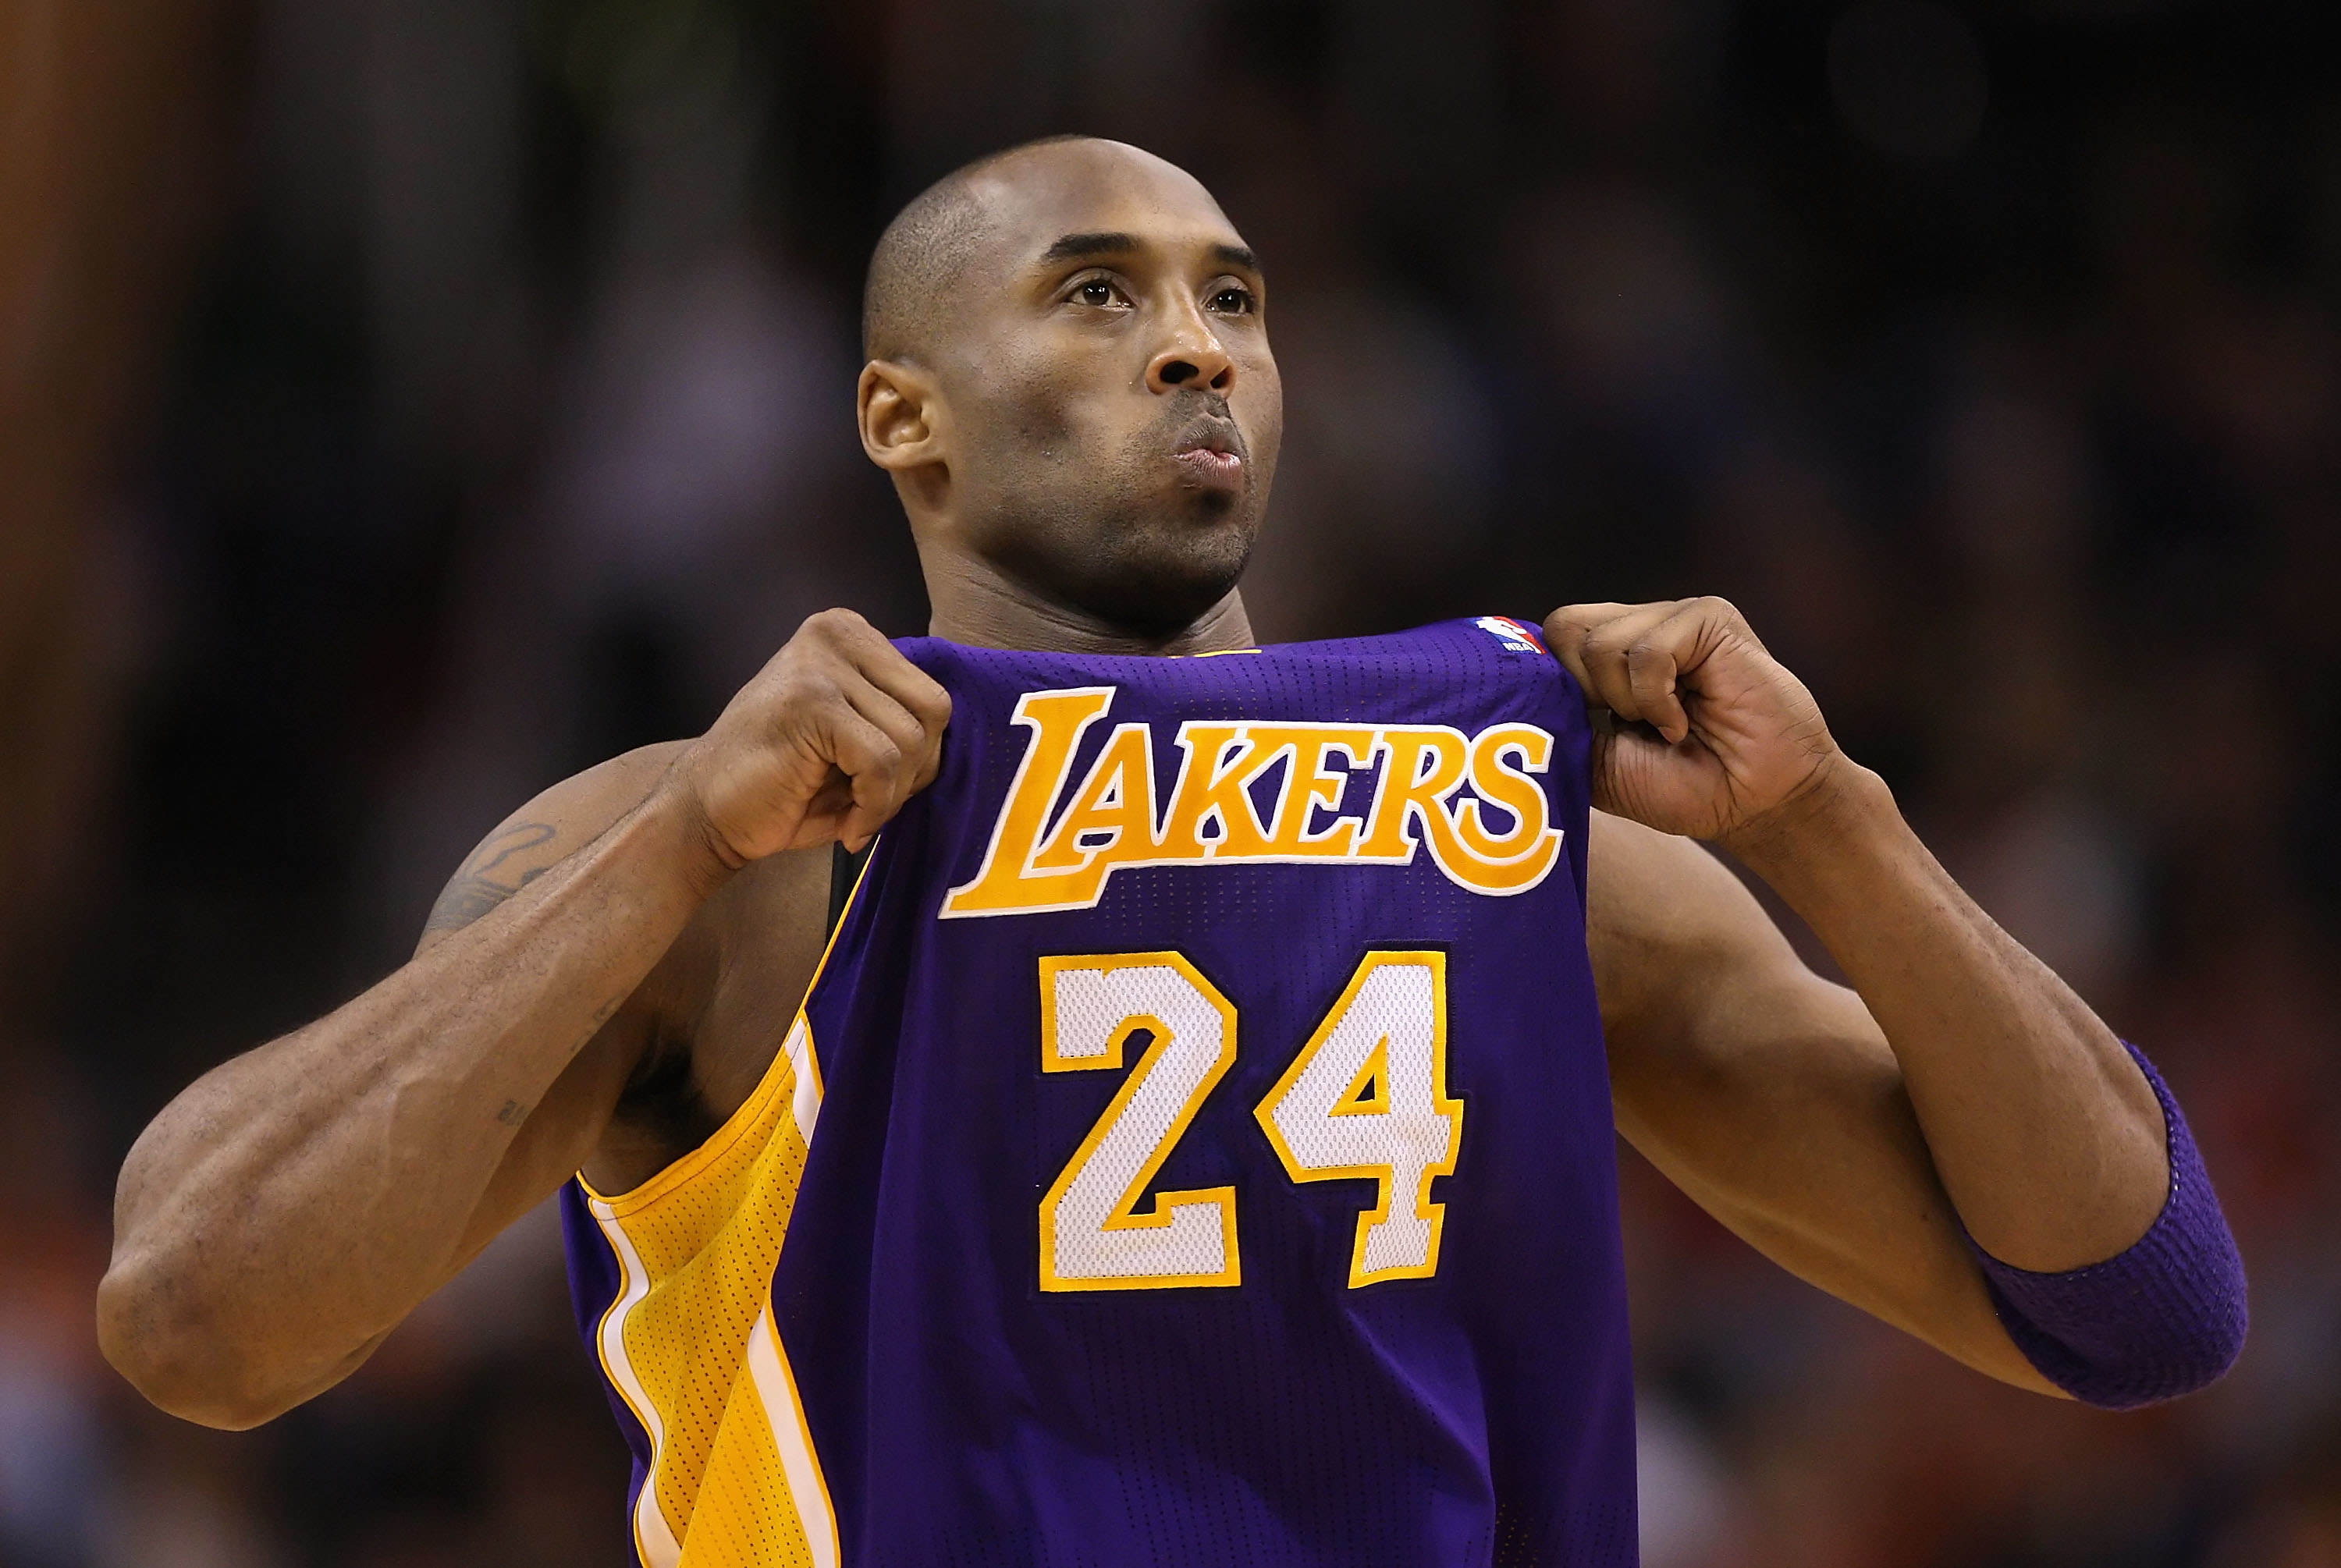 Kobe Bryant Quotes to Inspire and Motivate You - On3